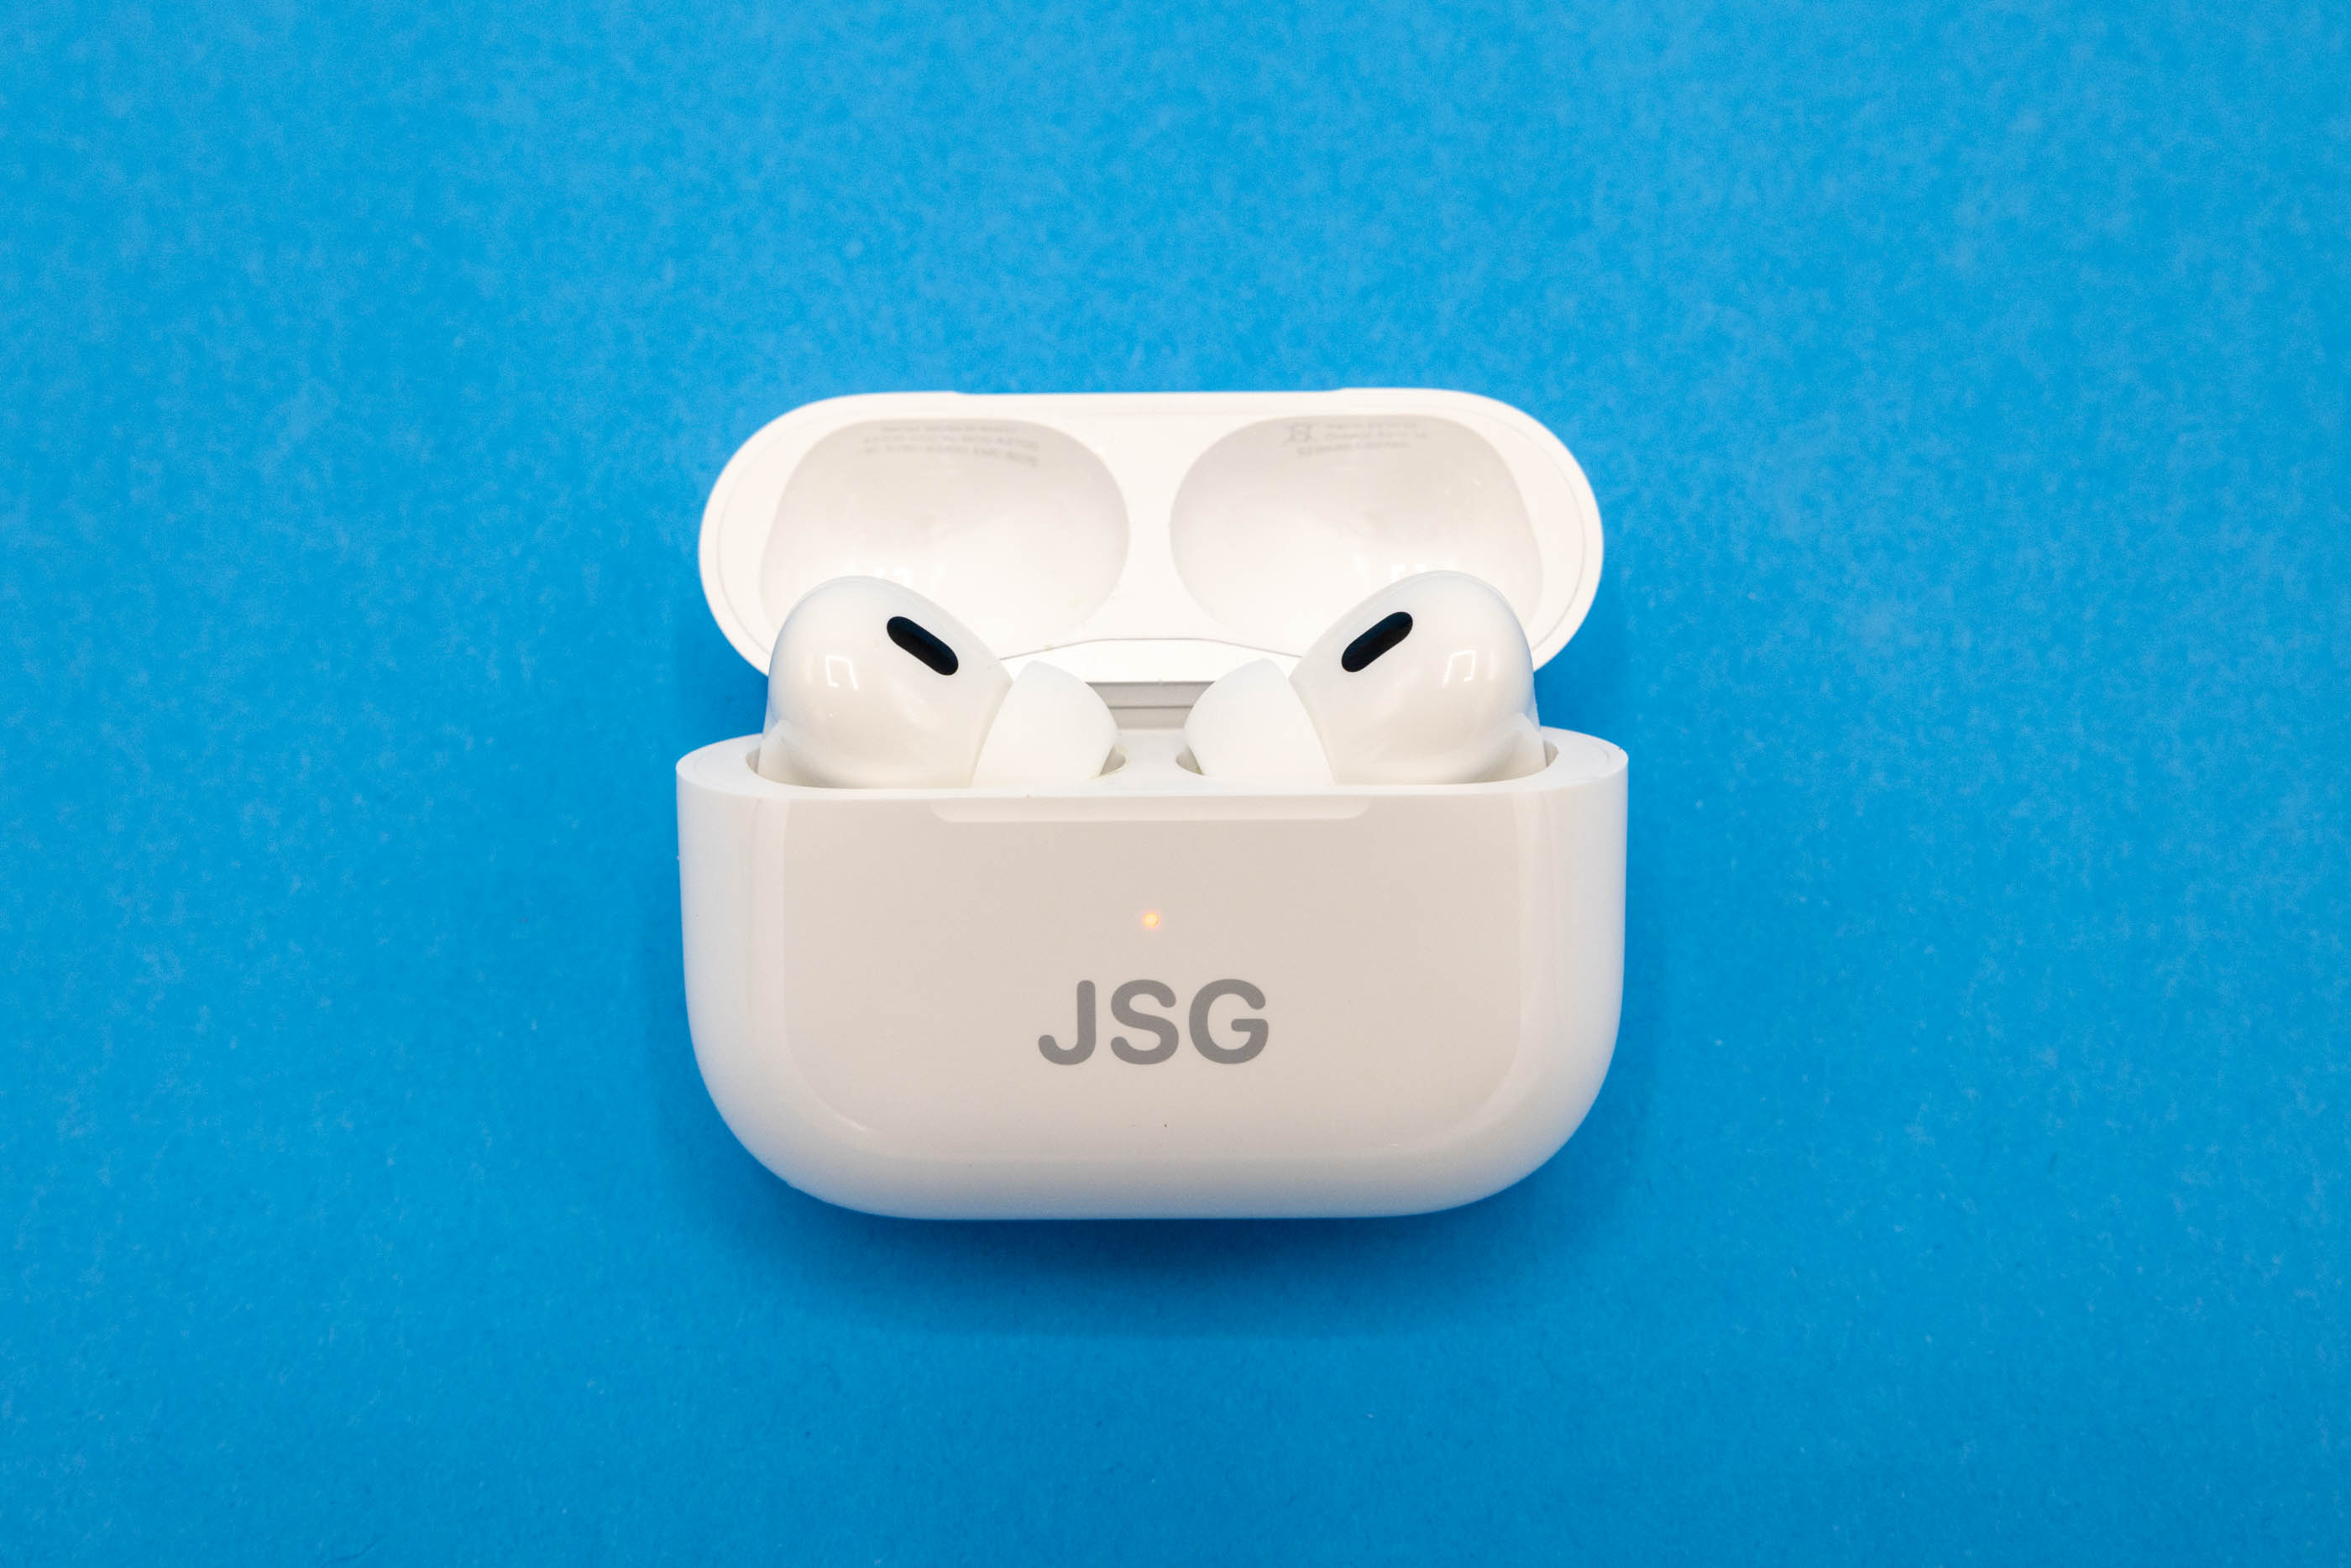 Apple supplier in India now producing components for AirPods